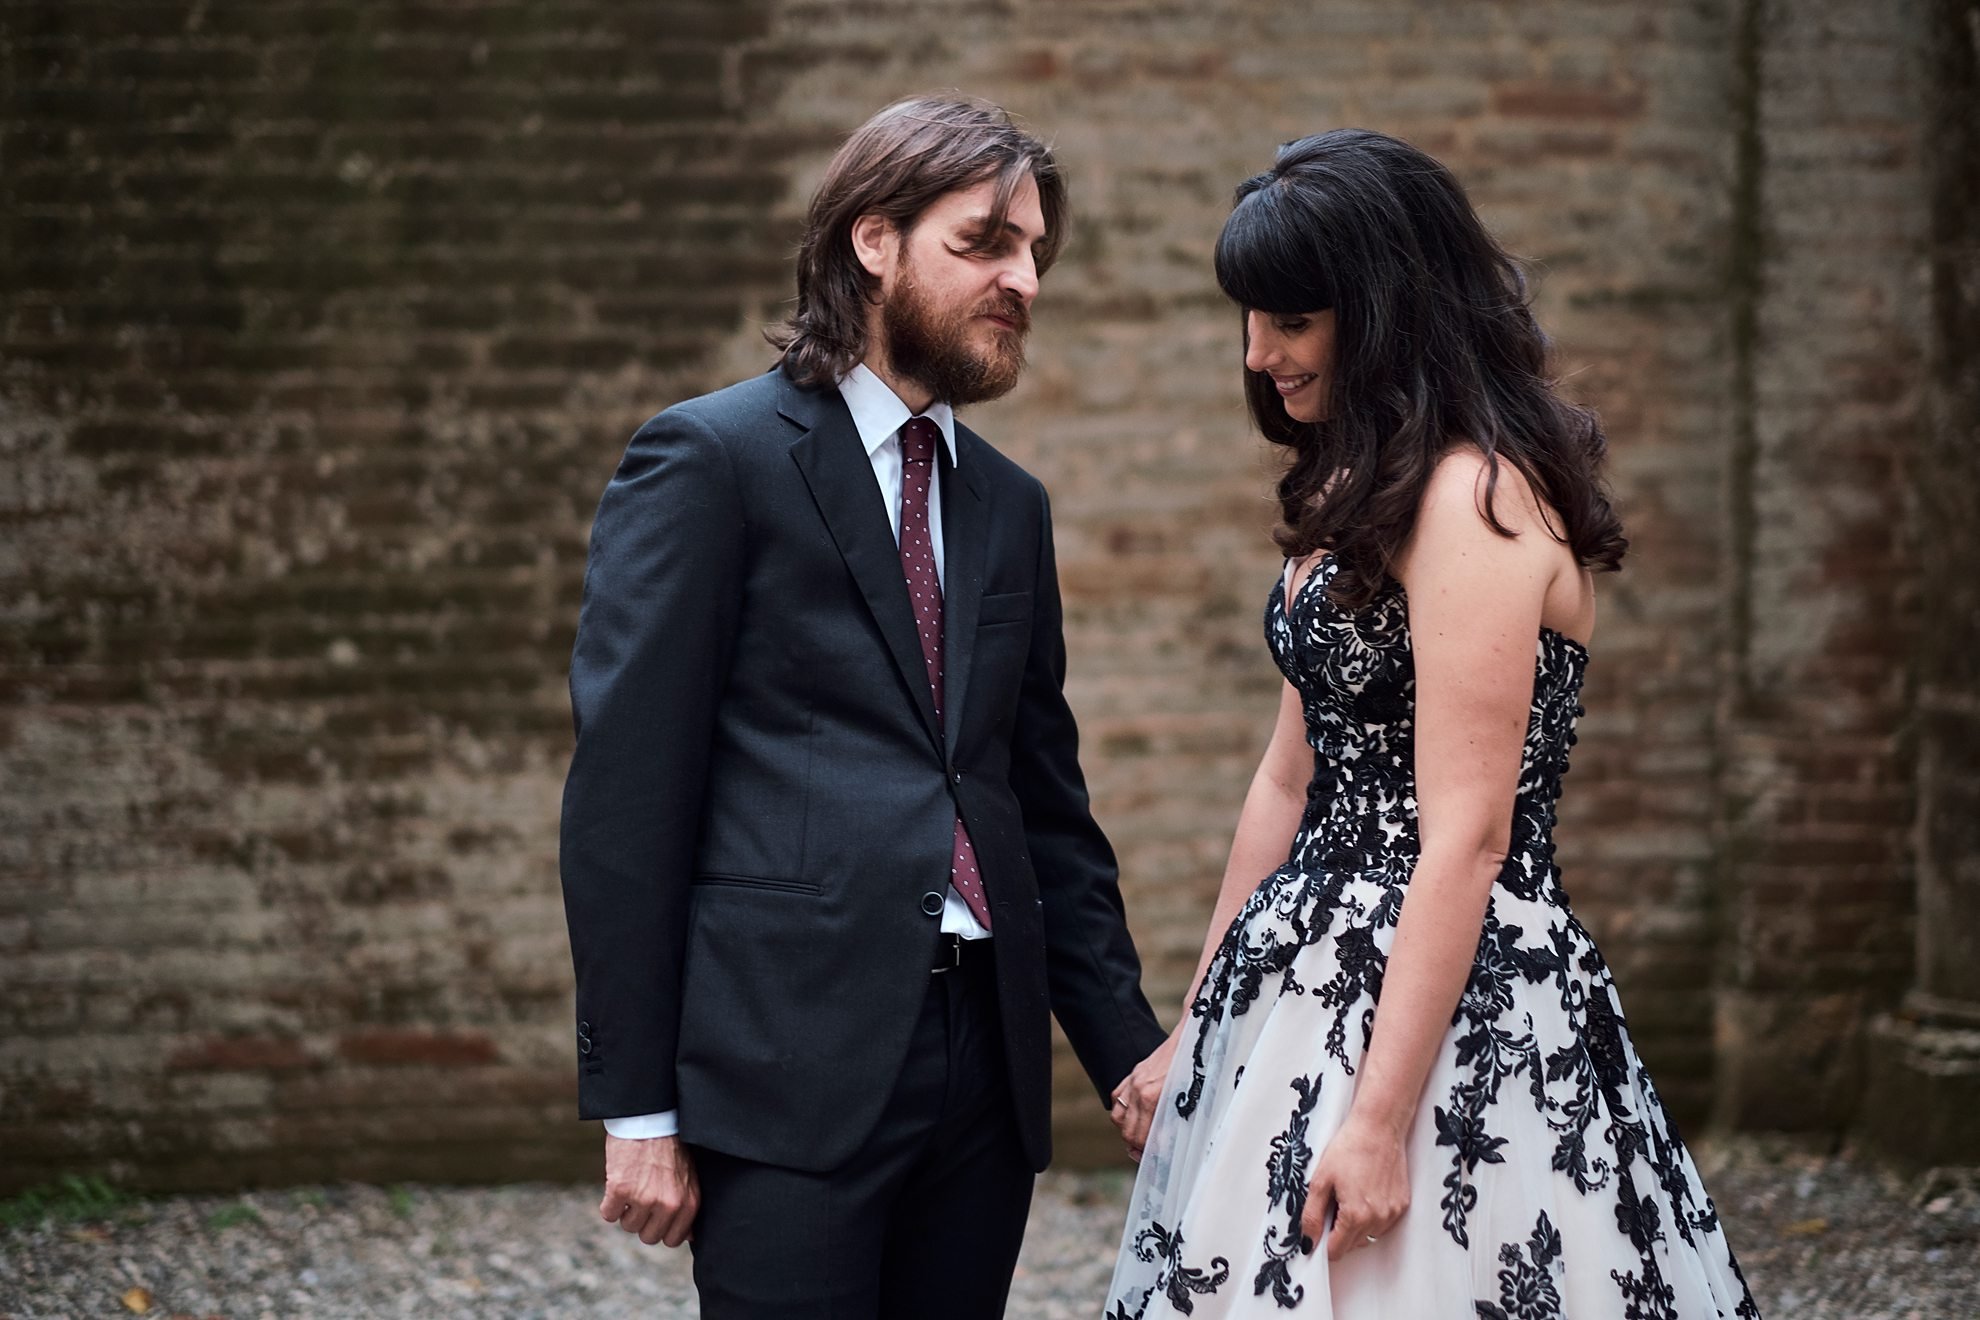  An intimate wedding in the charming Abbey of San Galgano, characterized by the lack of a roof. The civil ceremony celebrated by the Mayor took place on a rainy day, but always with emotion. Particularly the bride's dress with beautiful black embroid